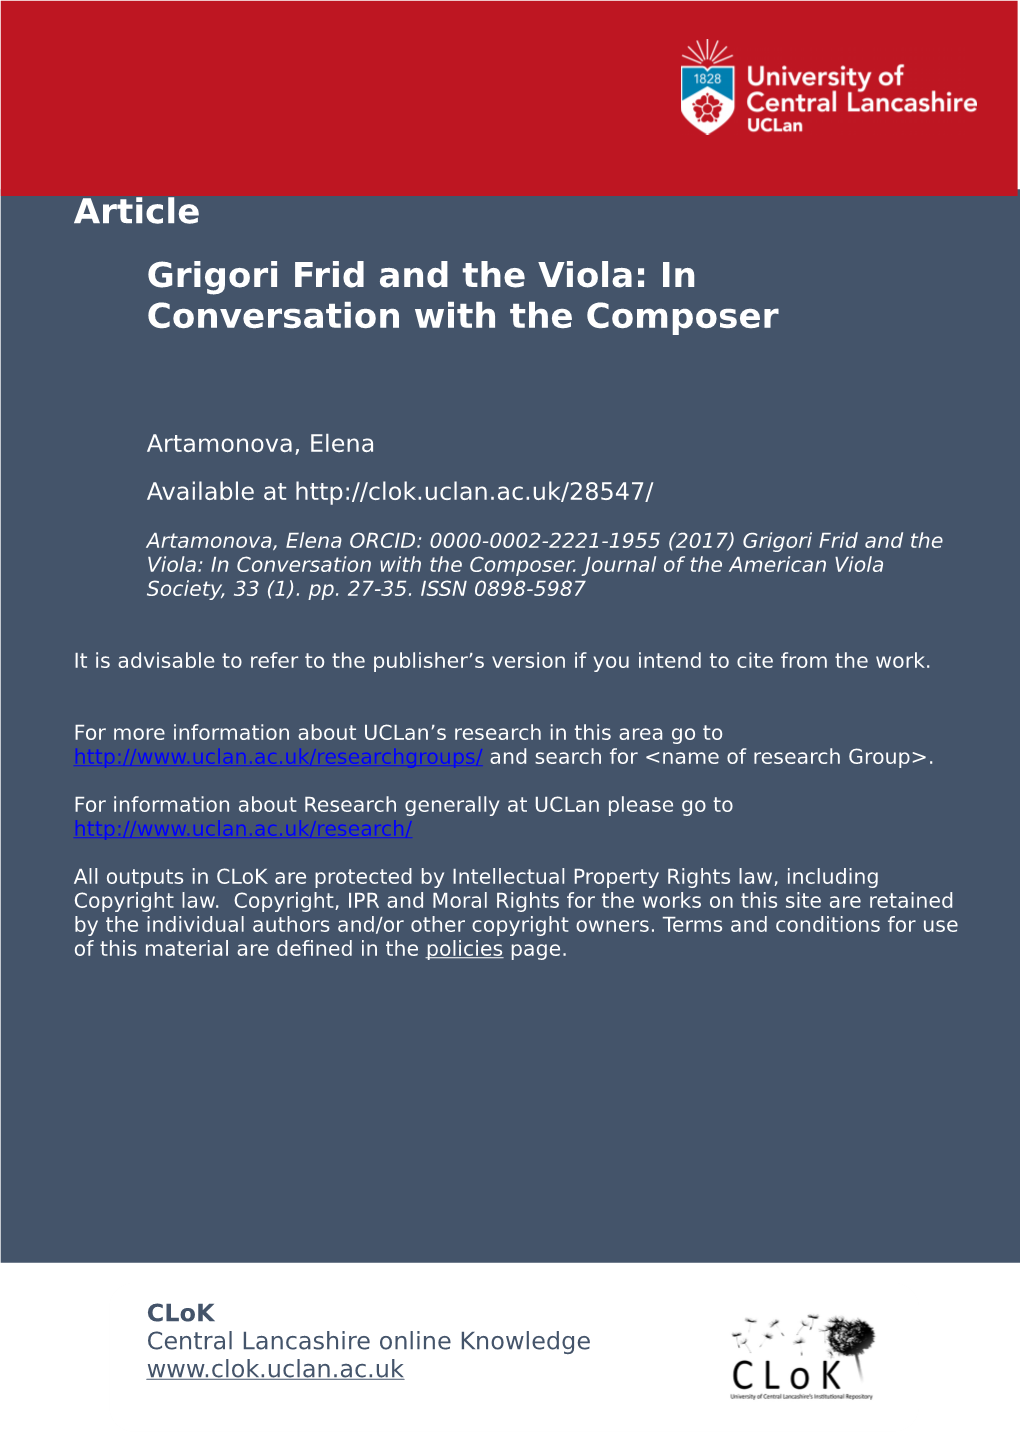 Grigori Frid and the Viola: in Conversation with the Composer